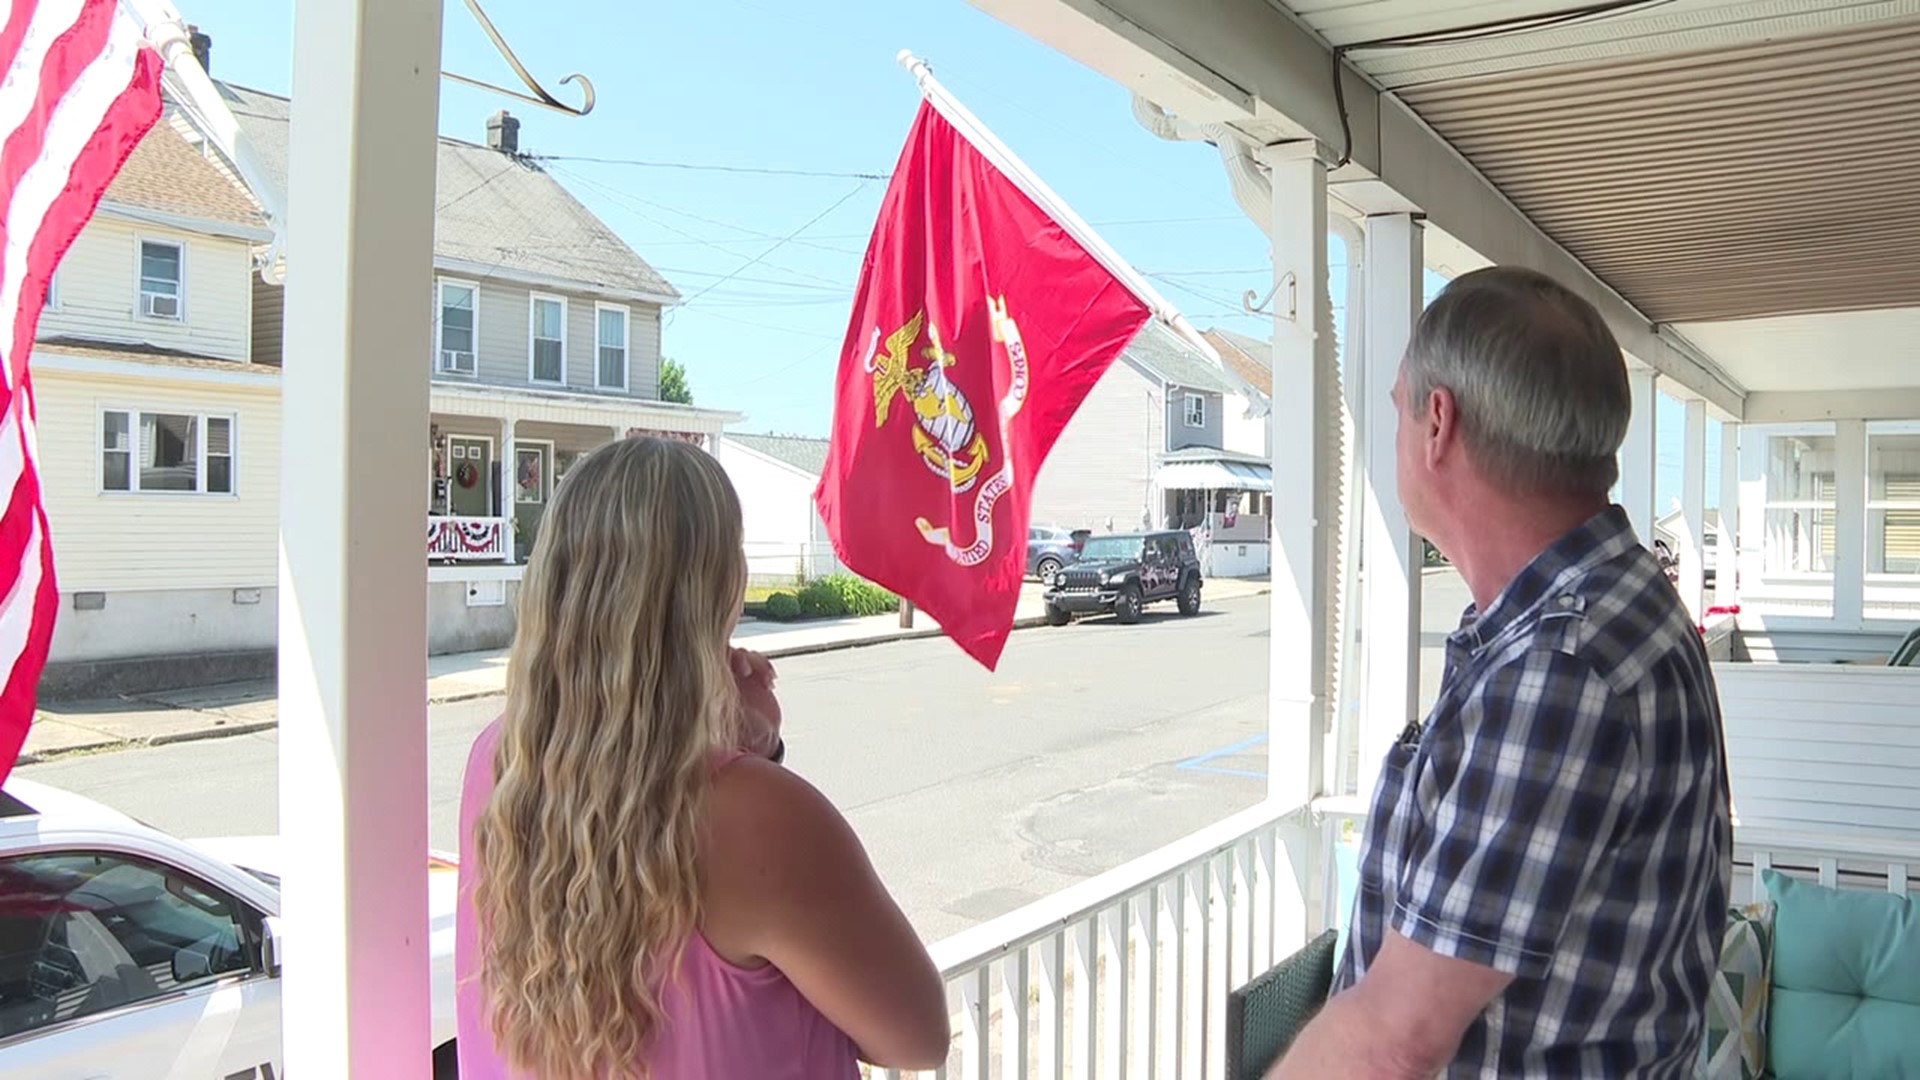 A Marine Corps veteran found a surprise on his porch when he returned from his daily walk.